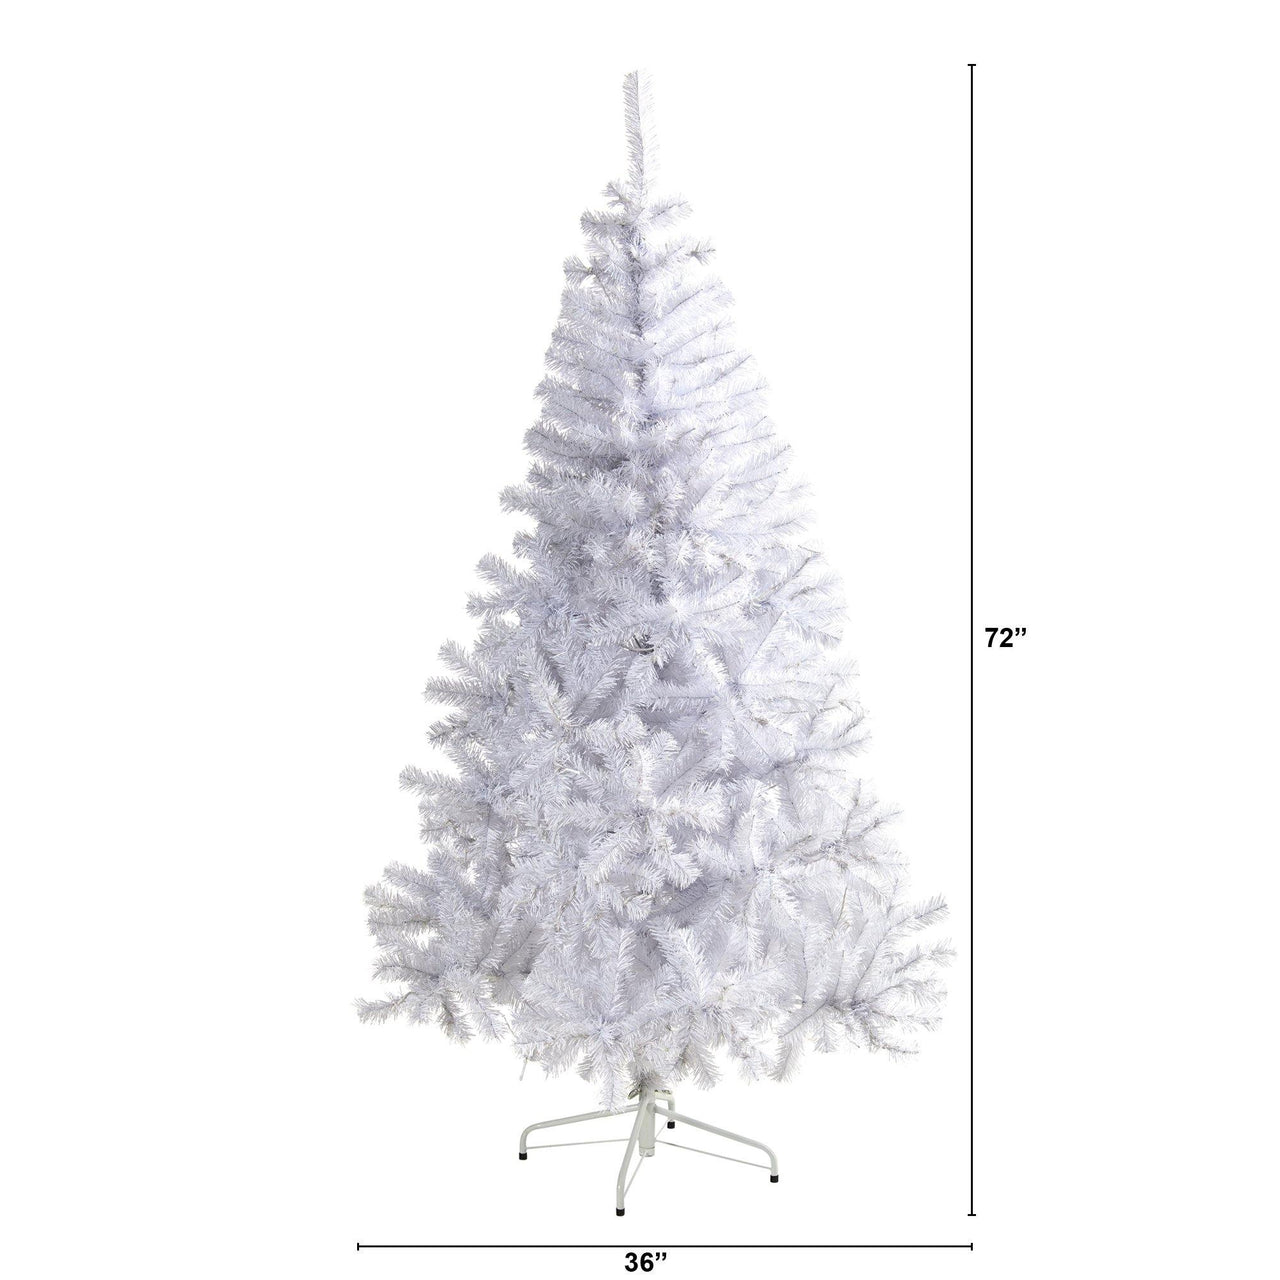 6’ White Artificial Christmas Tree with 680 Bendable Branches and 250 Clear LED Lights - The Fox Decor